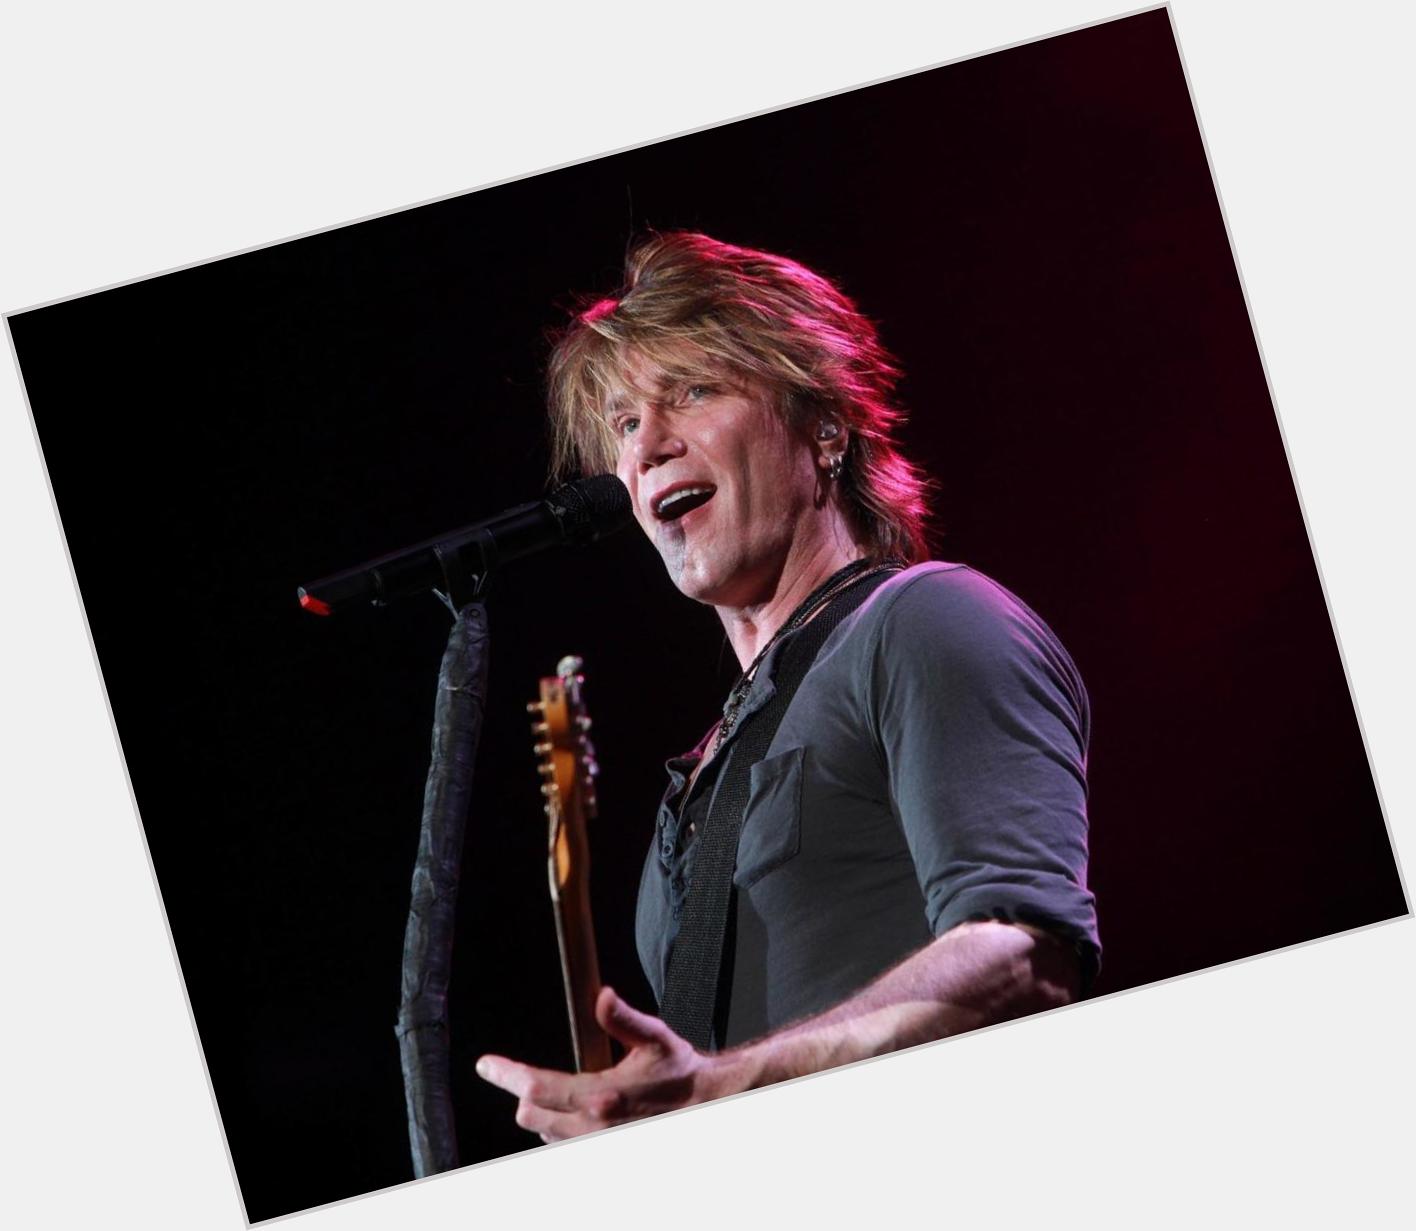 Please join us here at in wishing the one and only John Rzeznik a very Happy 55th Birthday today  